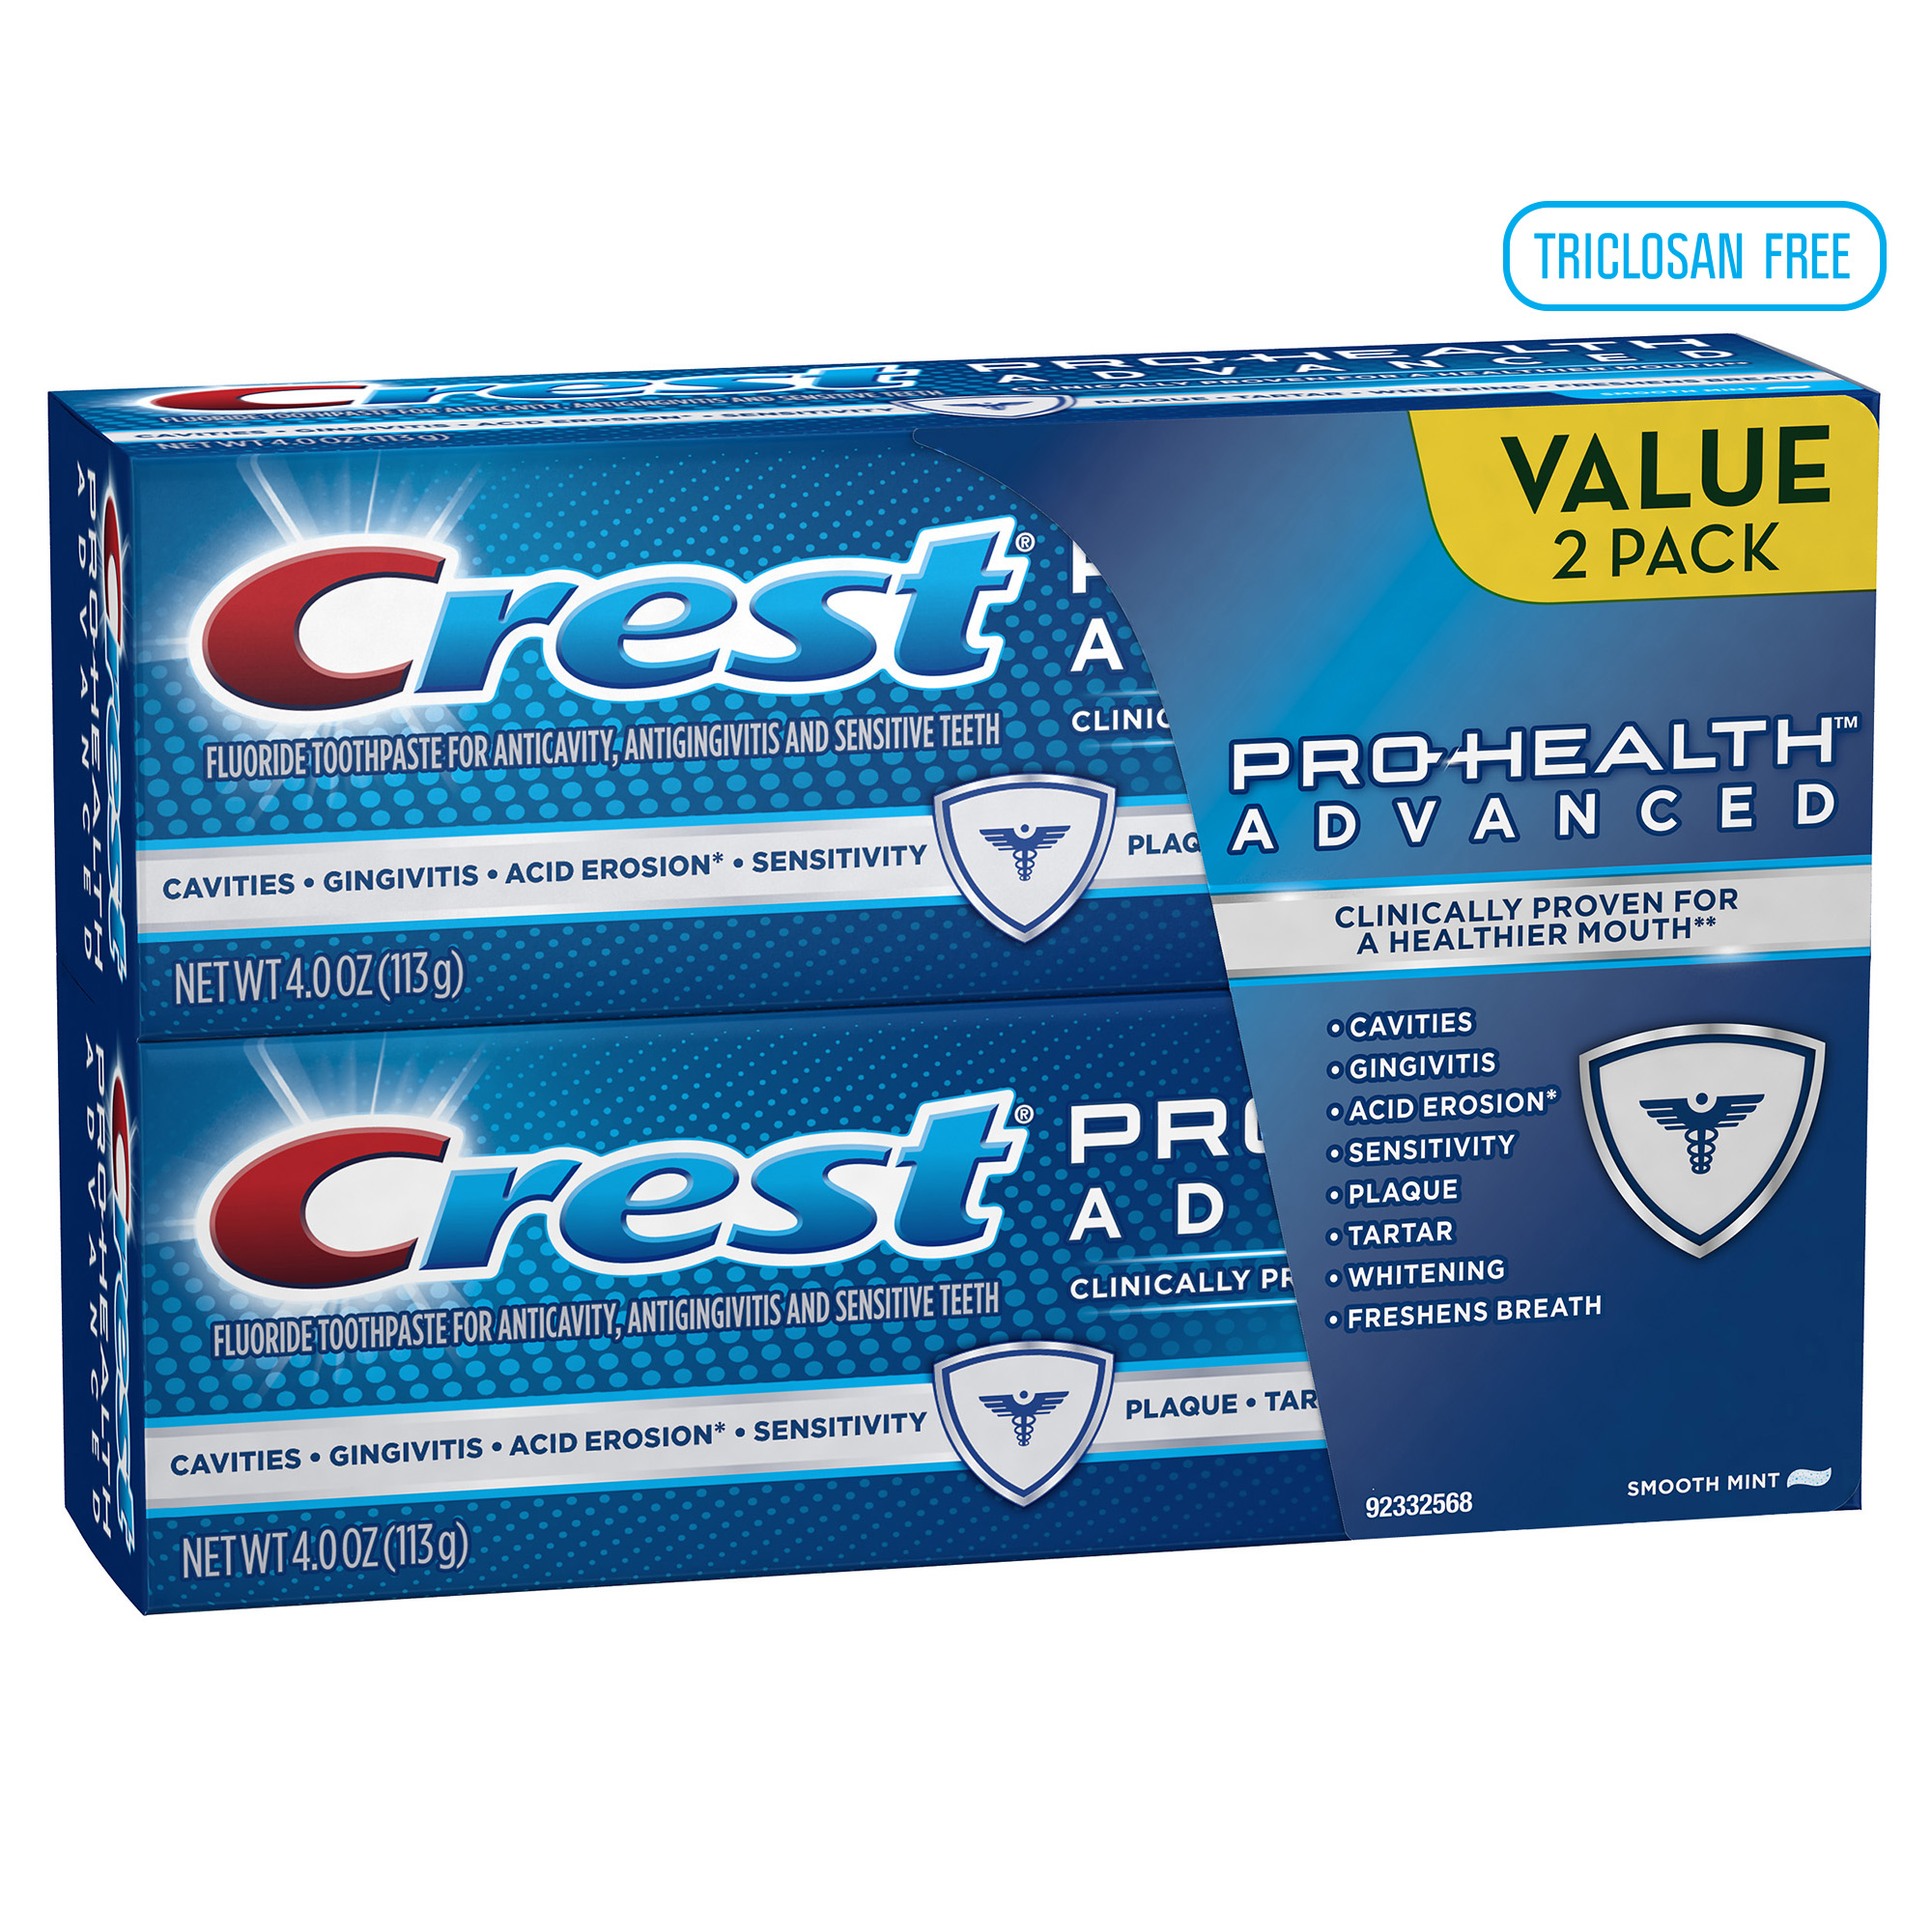 Crest Pro-Health Advanced Soothing Smooth Mint Toothpaste 8.0 oz. 2 Count - image 7 of 9